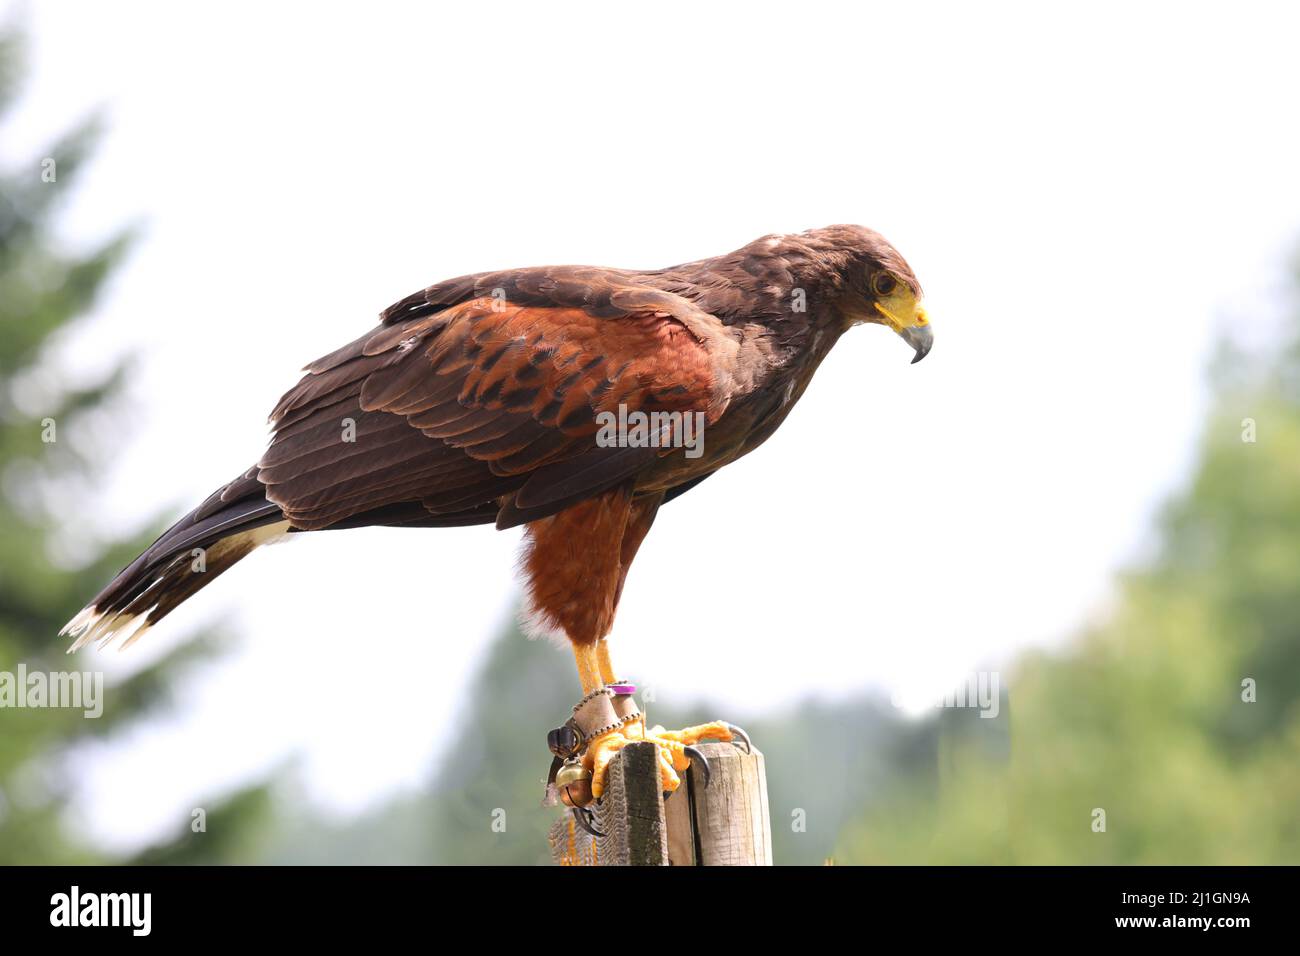 Harris buzzard resting on a perch in profile with a long yellow and gray beak Stock Photo